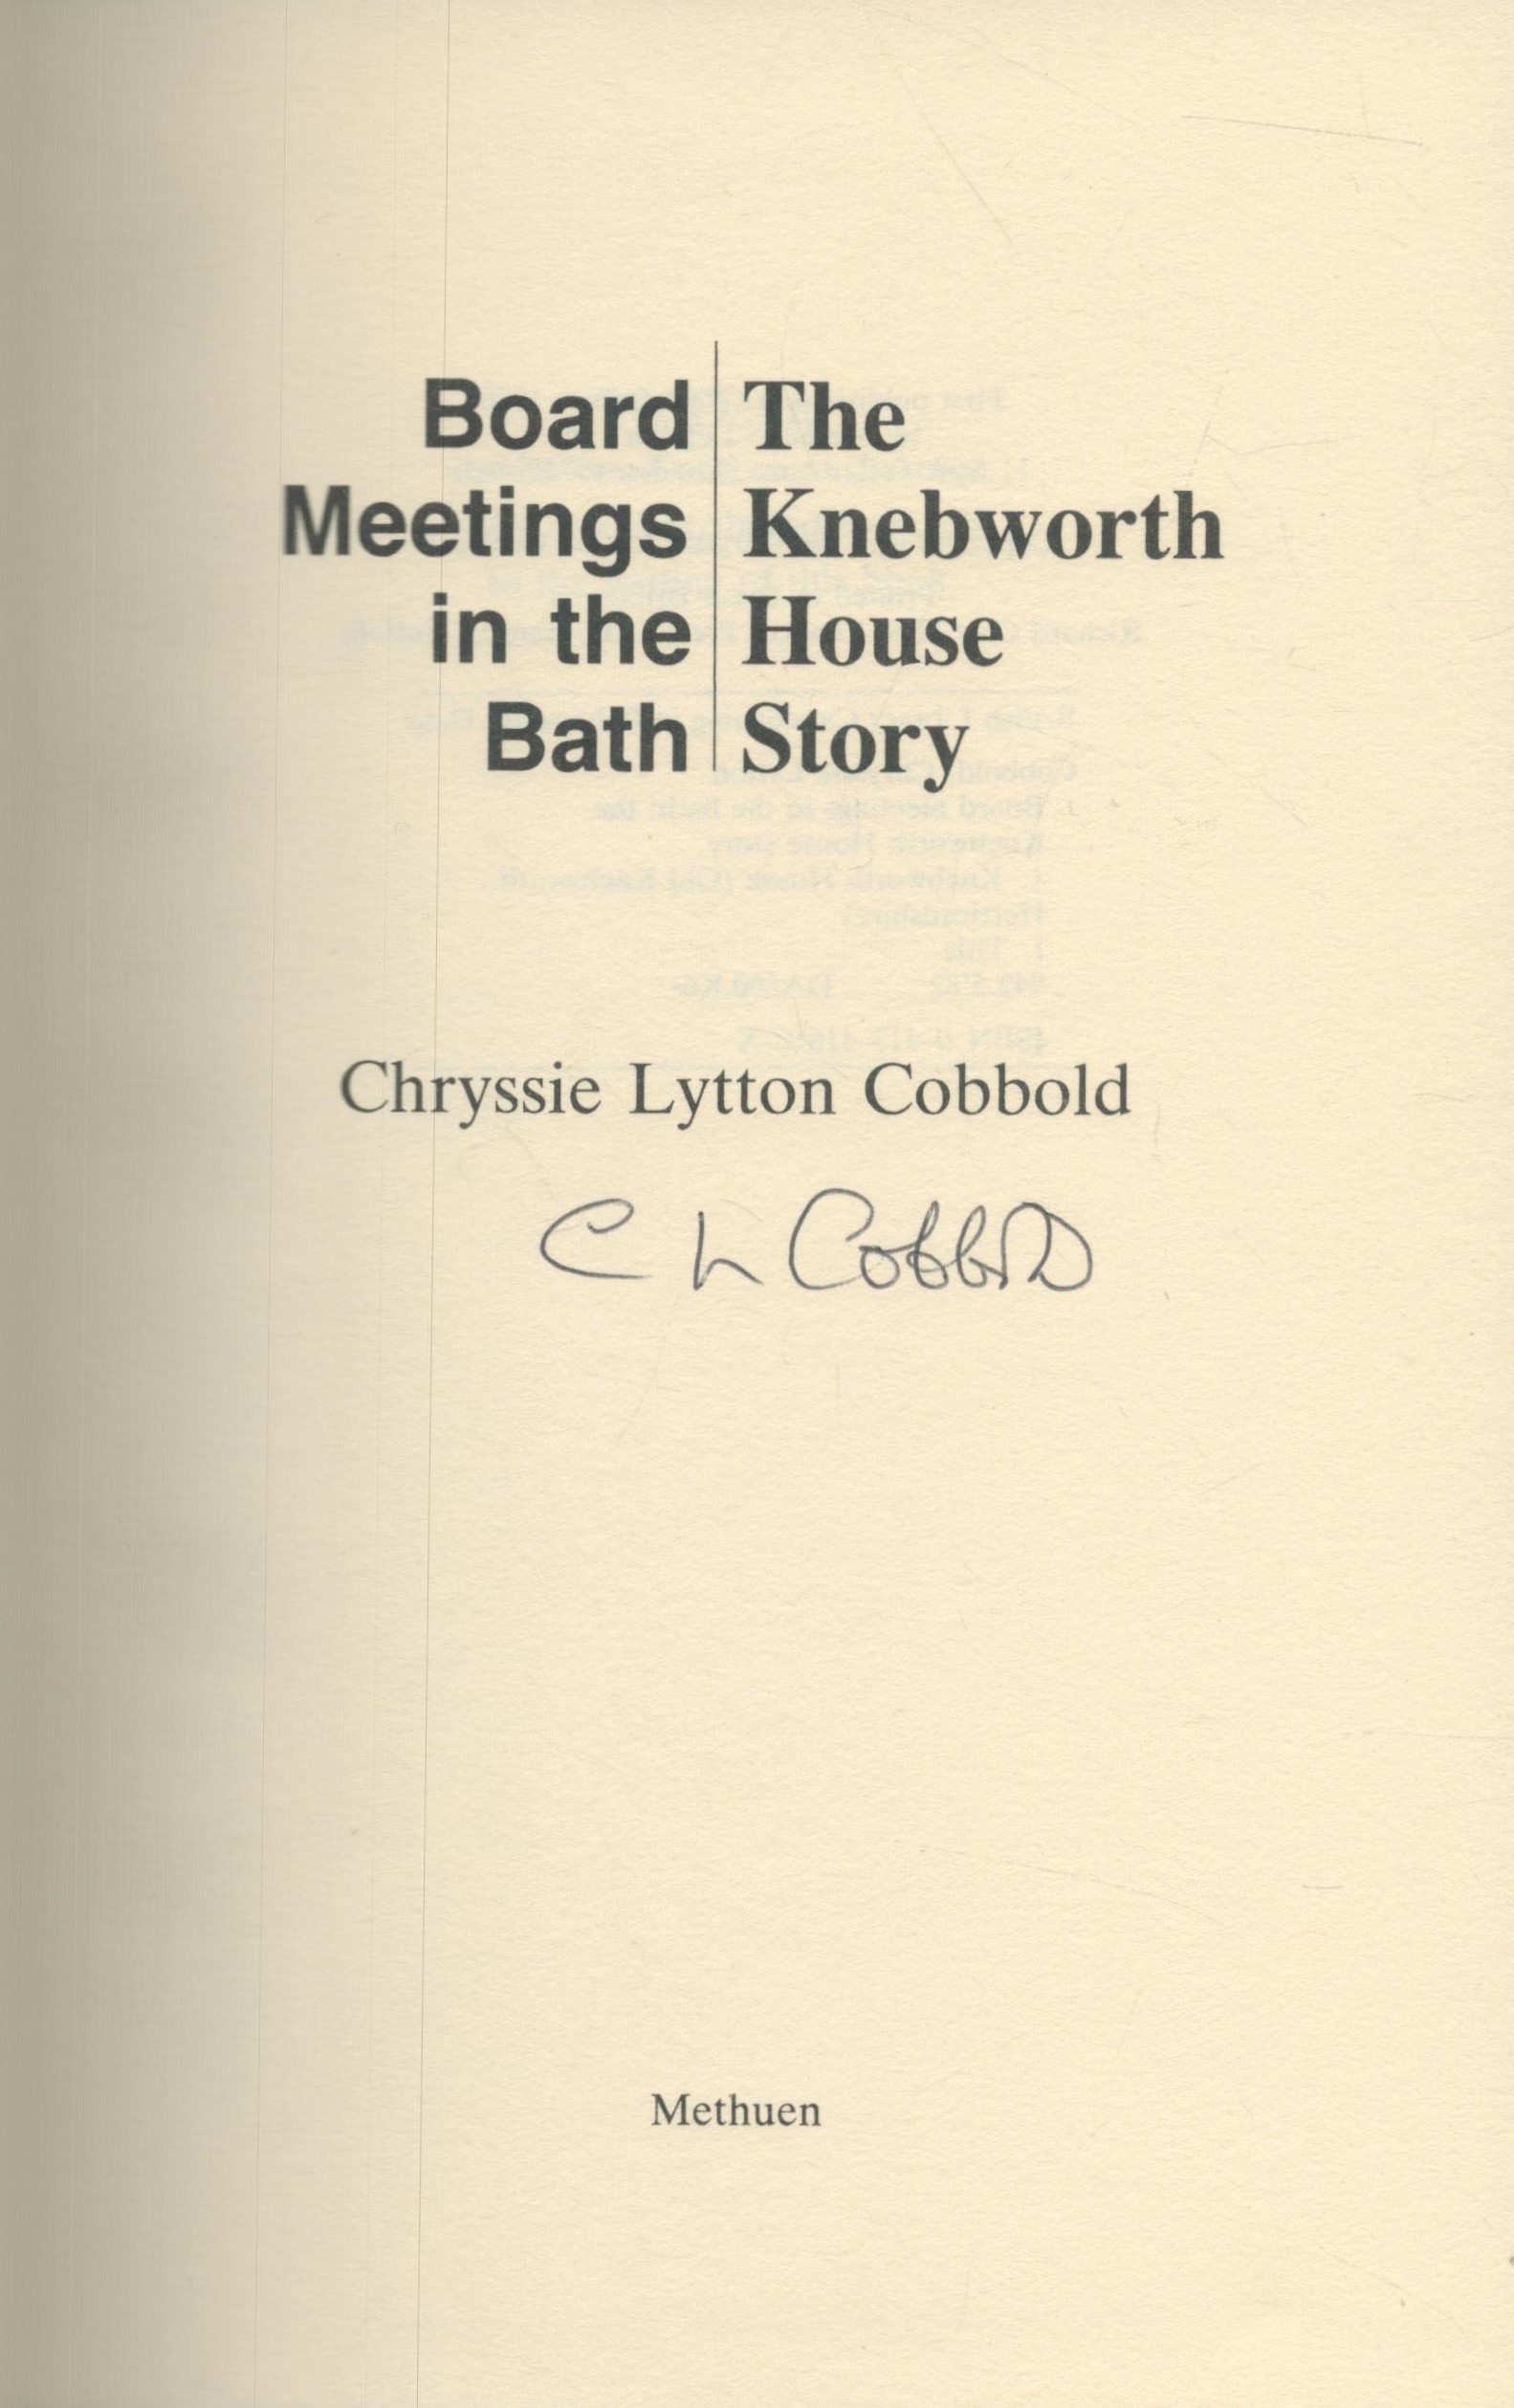 Chrissie Lytton Cobbold Signed Book - Board Meetings in the Bath - The Knebworth House Story by - Image 2 of 3